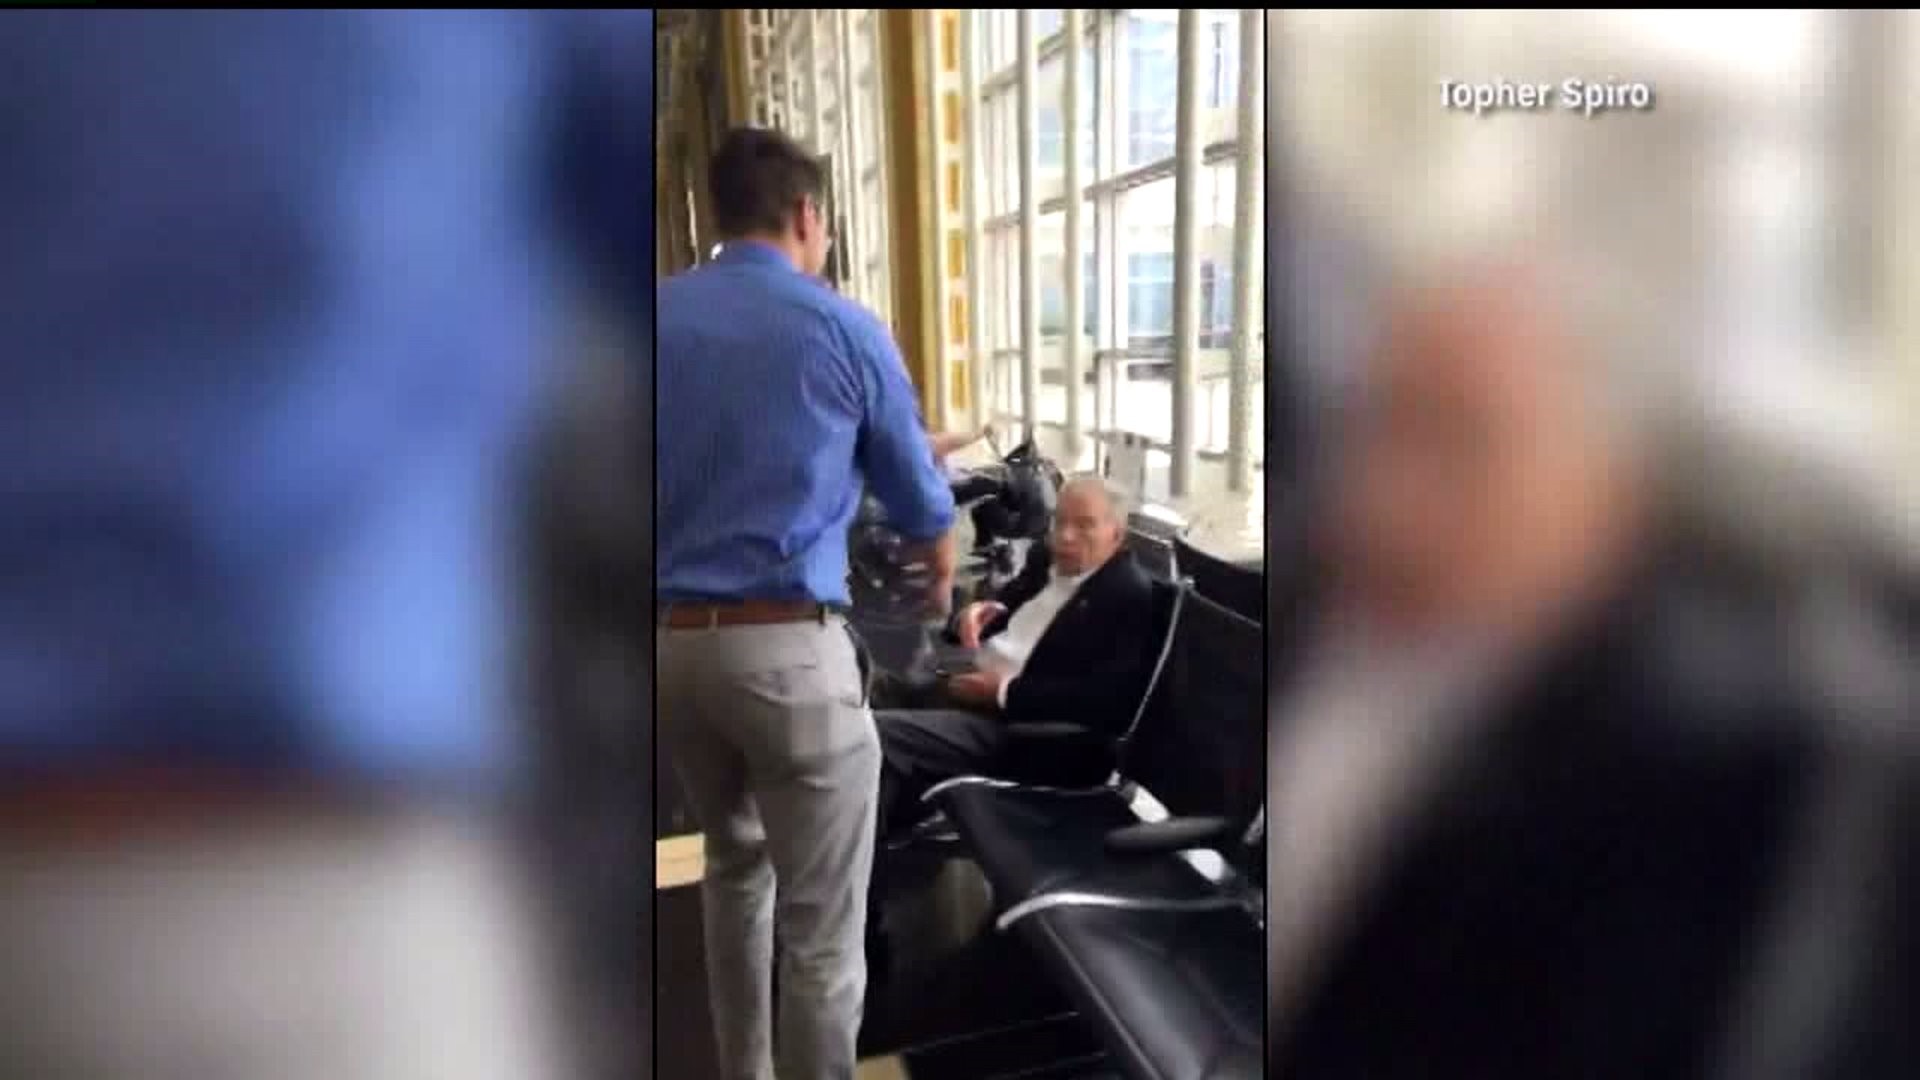 U.S. Sen. Chuck Grassley confronted at airport about healthcare bill